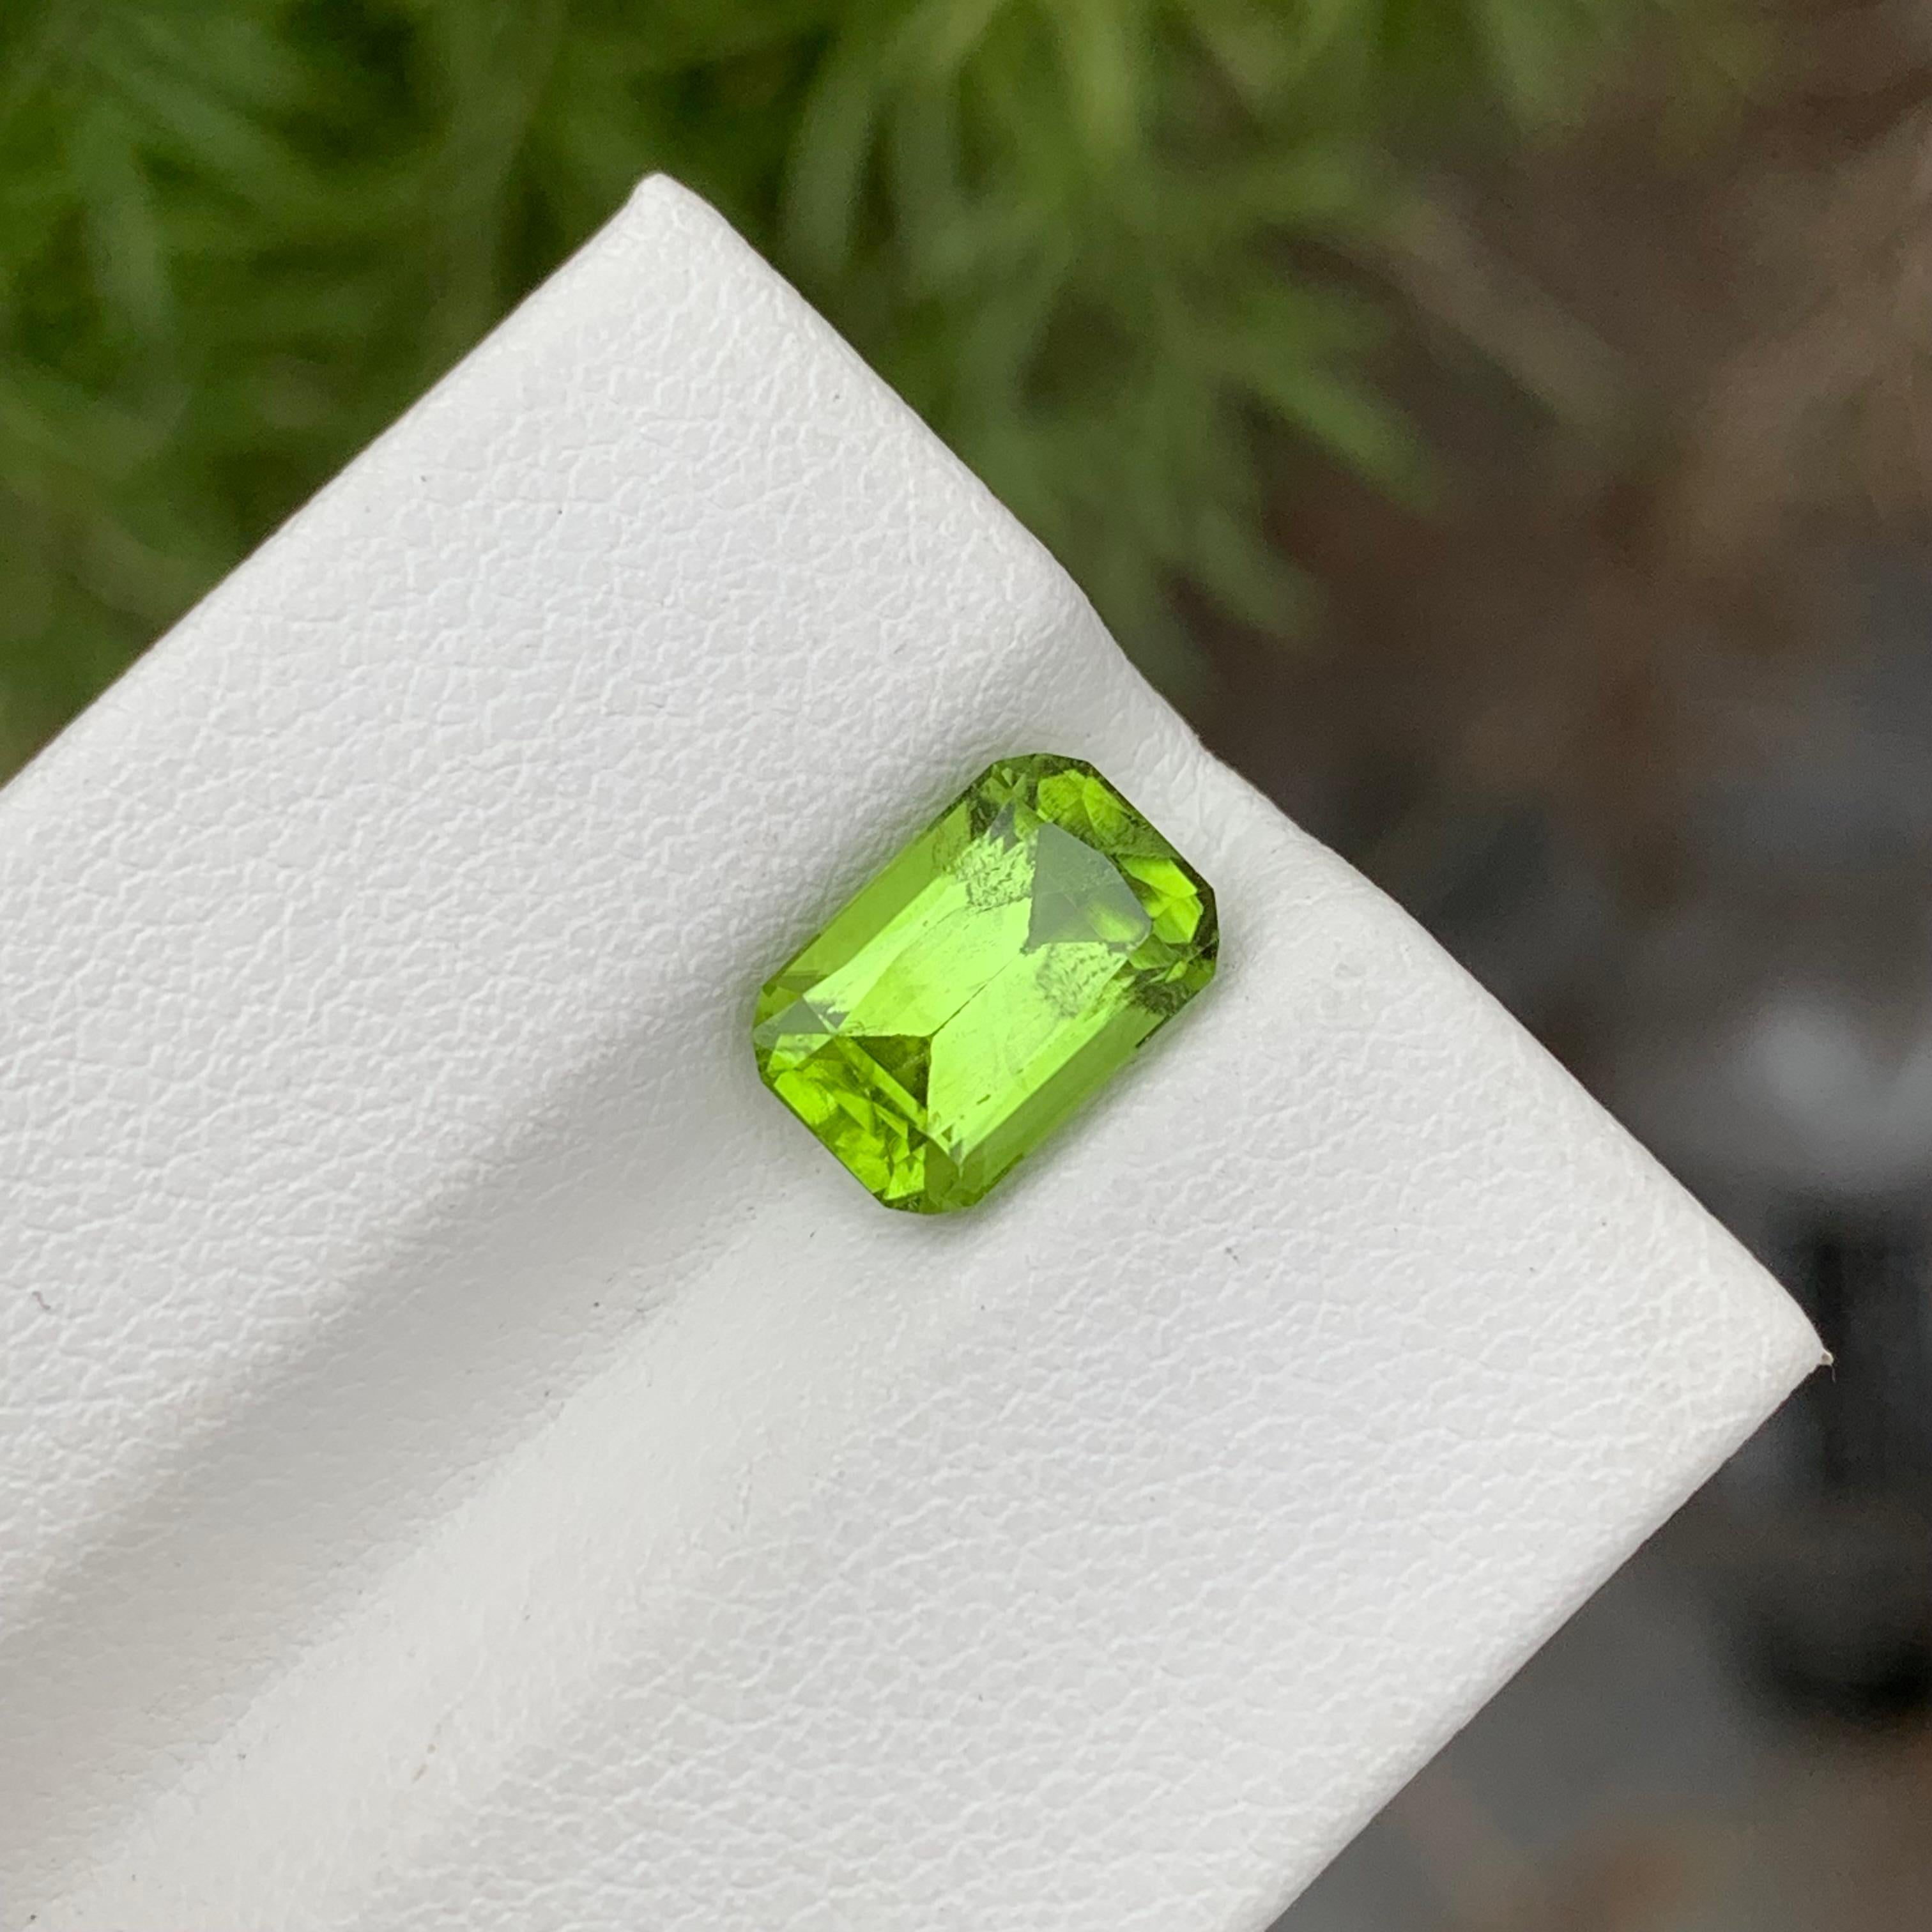 Loose Peridot
Weight: 2.70 Carats
Dimension: 9.3 x 6.2 x 5.2 Mm
Colour: Green
Origin: Supat Valley, Pakistan
Shape: Cushion
Certificate: On Demand
Treatment: Non

Peridot, a vibrant and lustrous gemstone, has been cherished for centuries for its